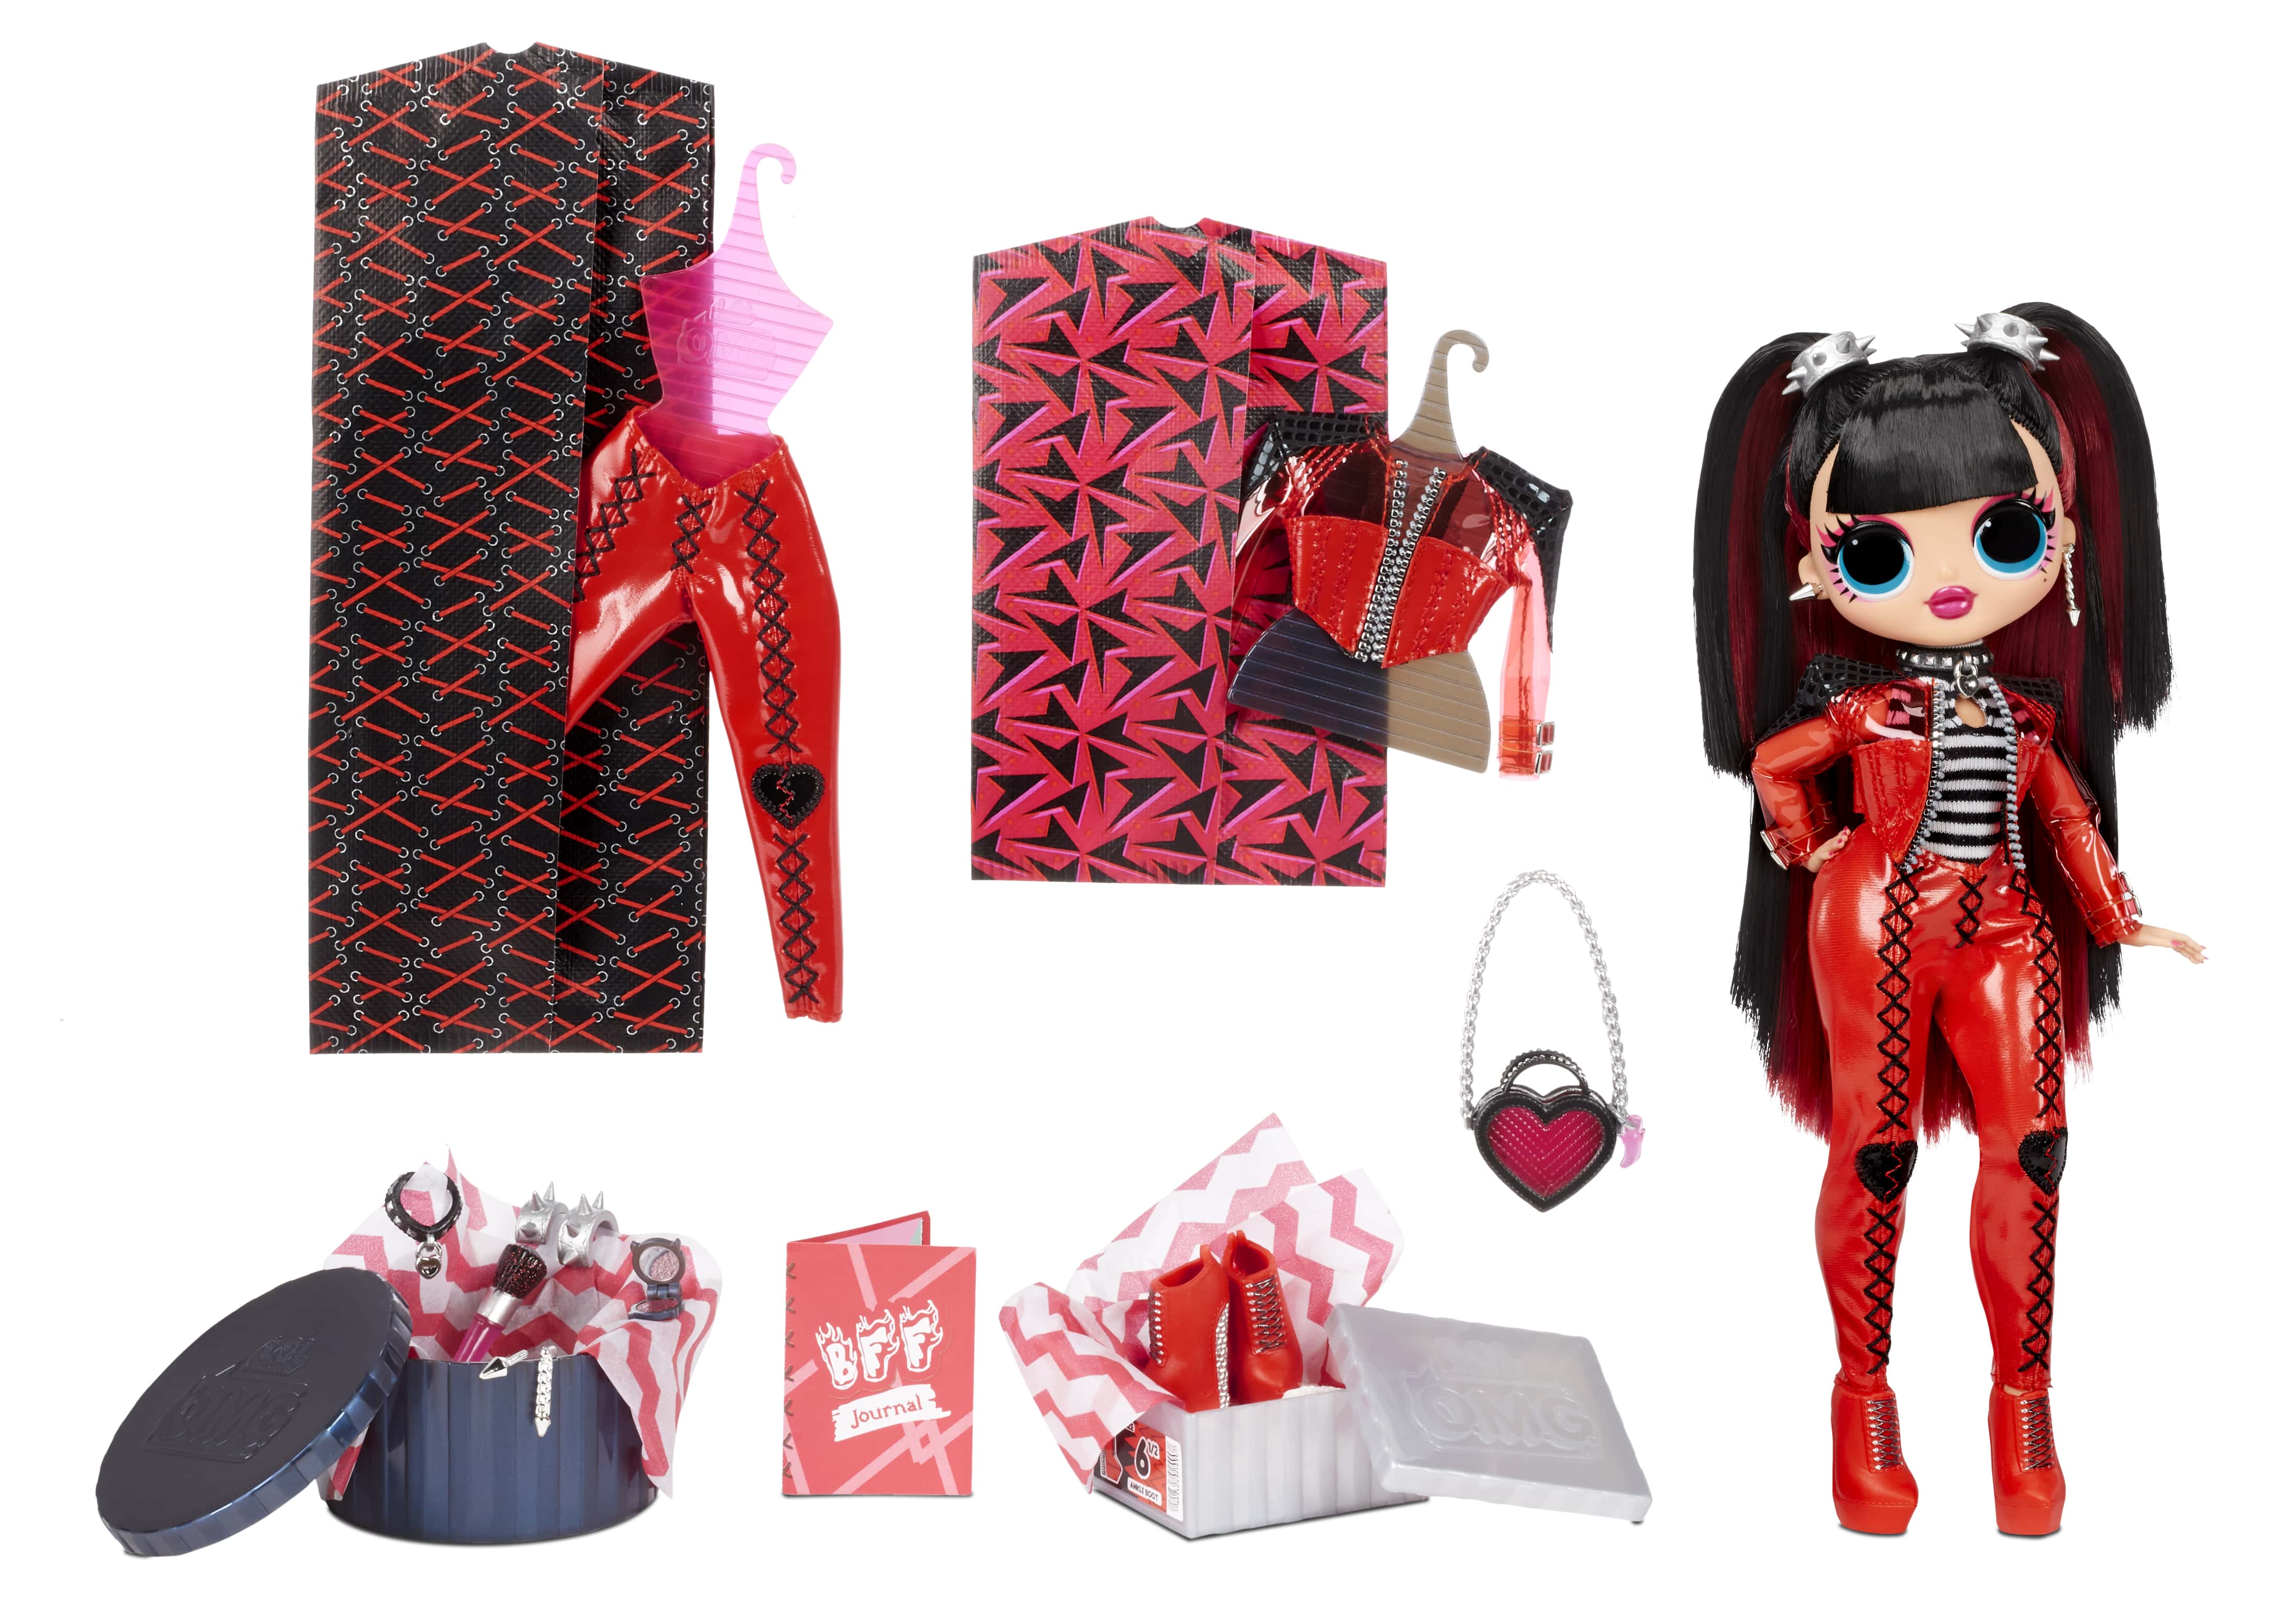 LOL Surprise OMG Spicy Babe Fashion Doll, Great Gift for Kids Ages 4 5 6+ - image 4 of 8